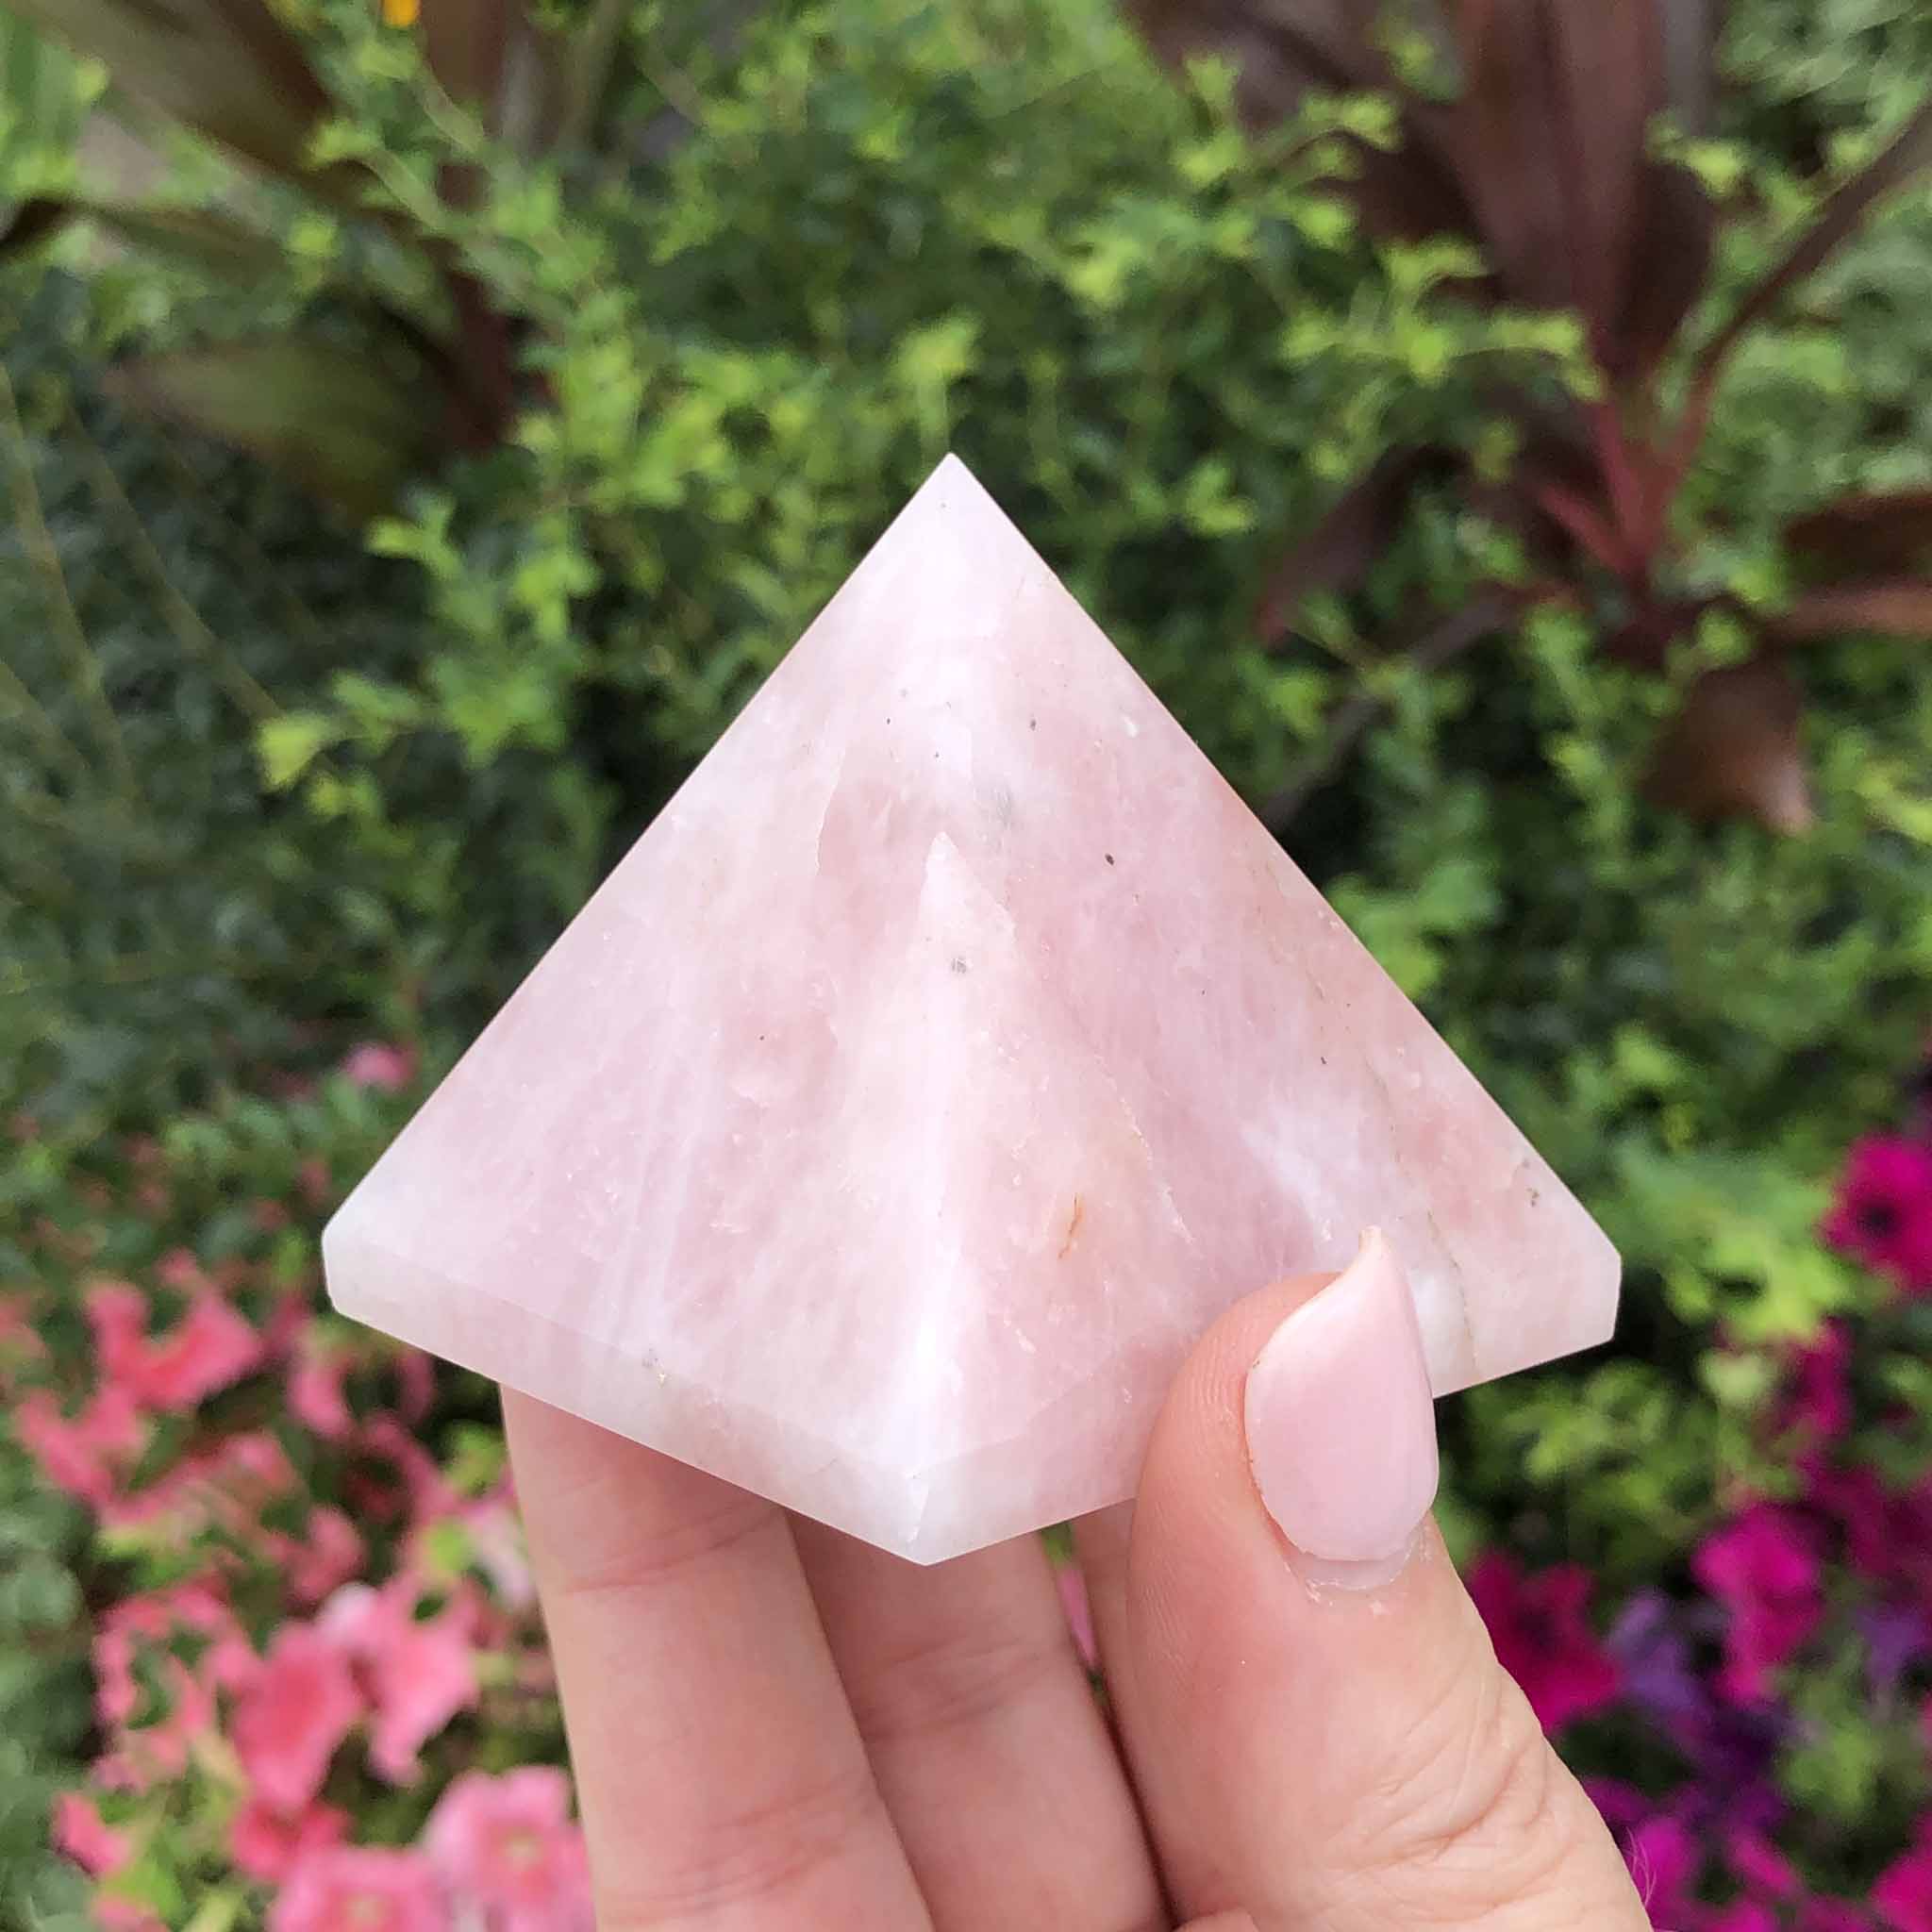 Rose Quartz Benefits: History, Meaning and Uses | Eerie Mineral Co.